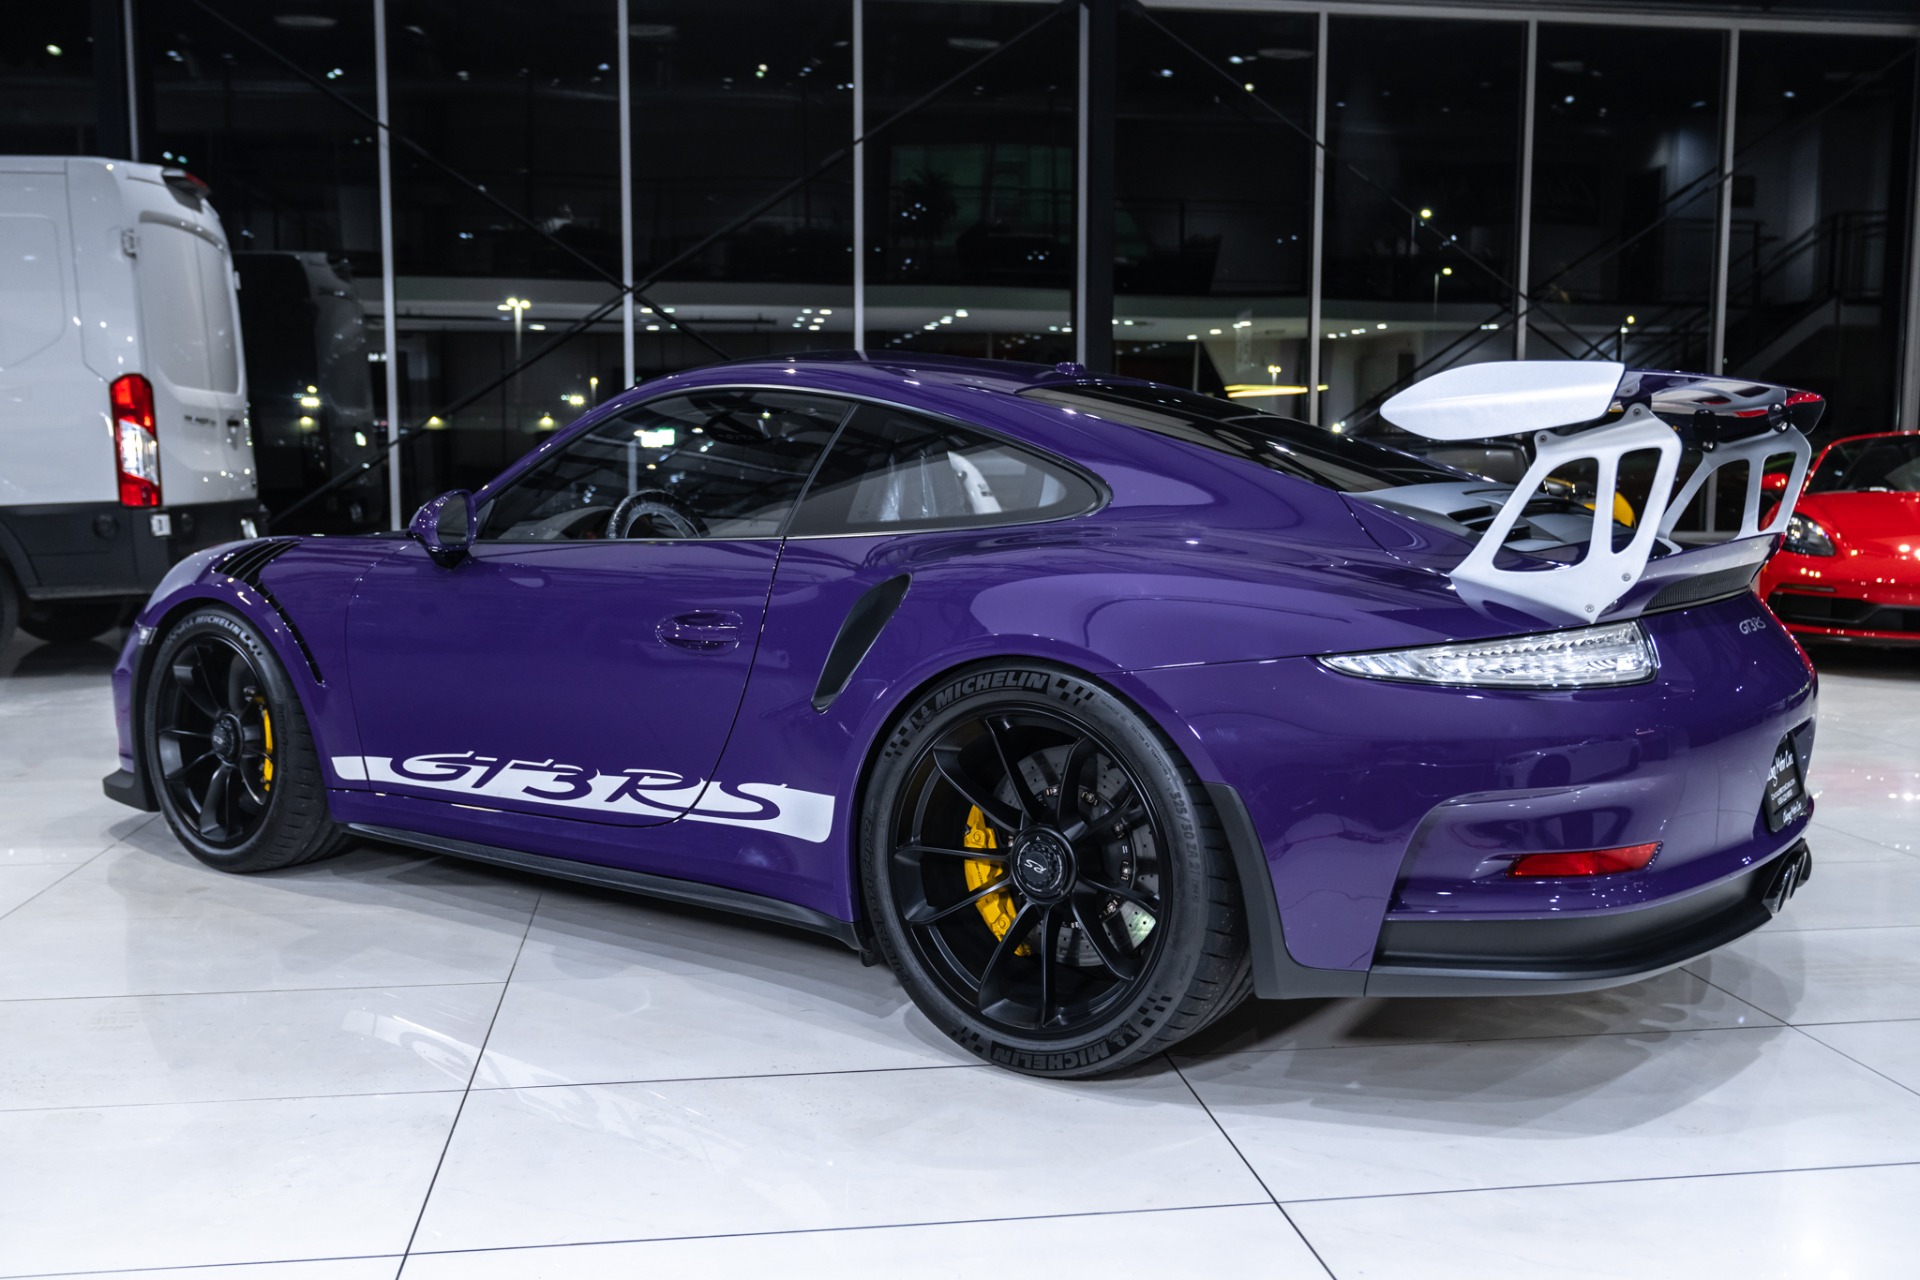 Used-2016-Porsche-911-GT3-RS-Ultraviolet-Loaded-PCCBs-Comfort-Seats-Only-1760-Miles-PPF